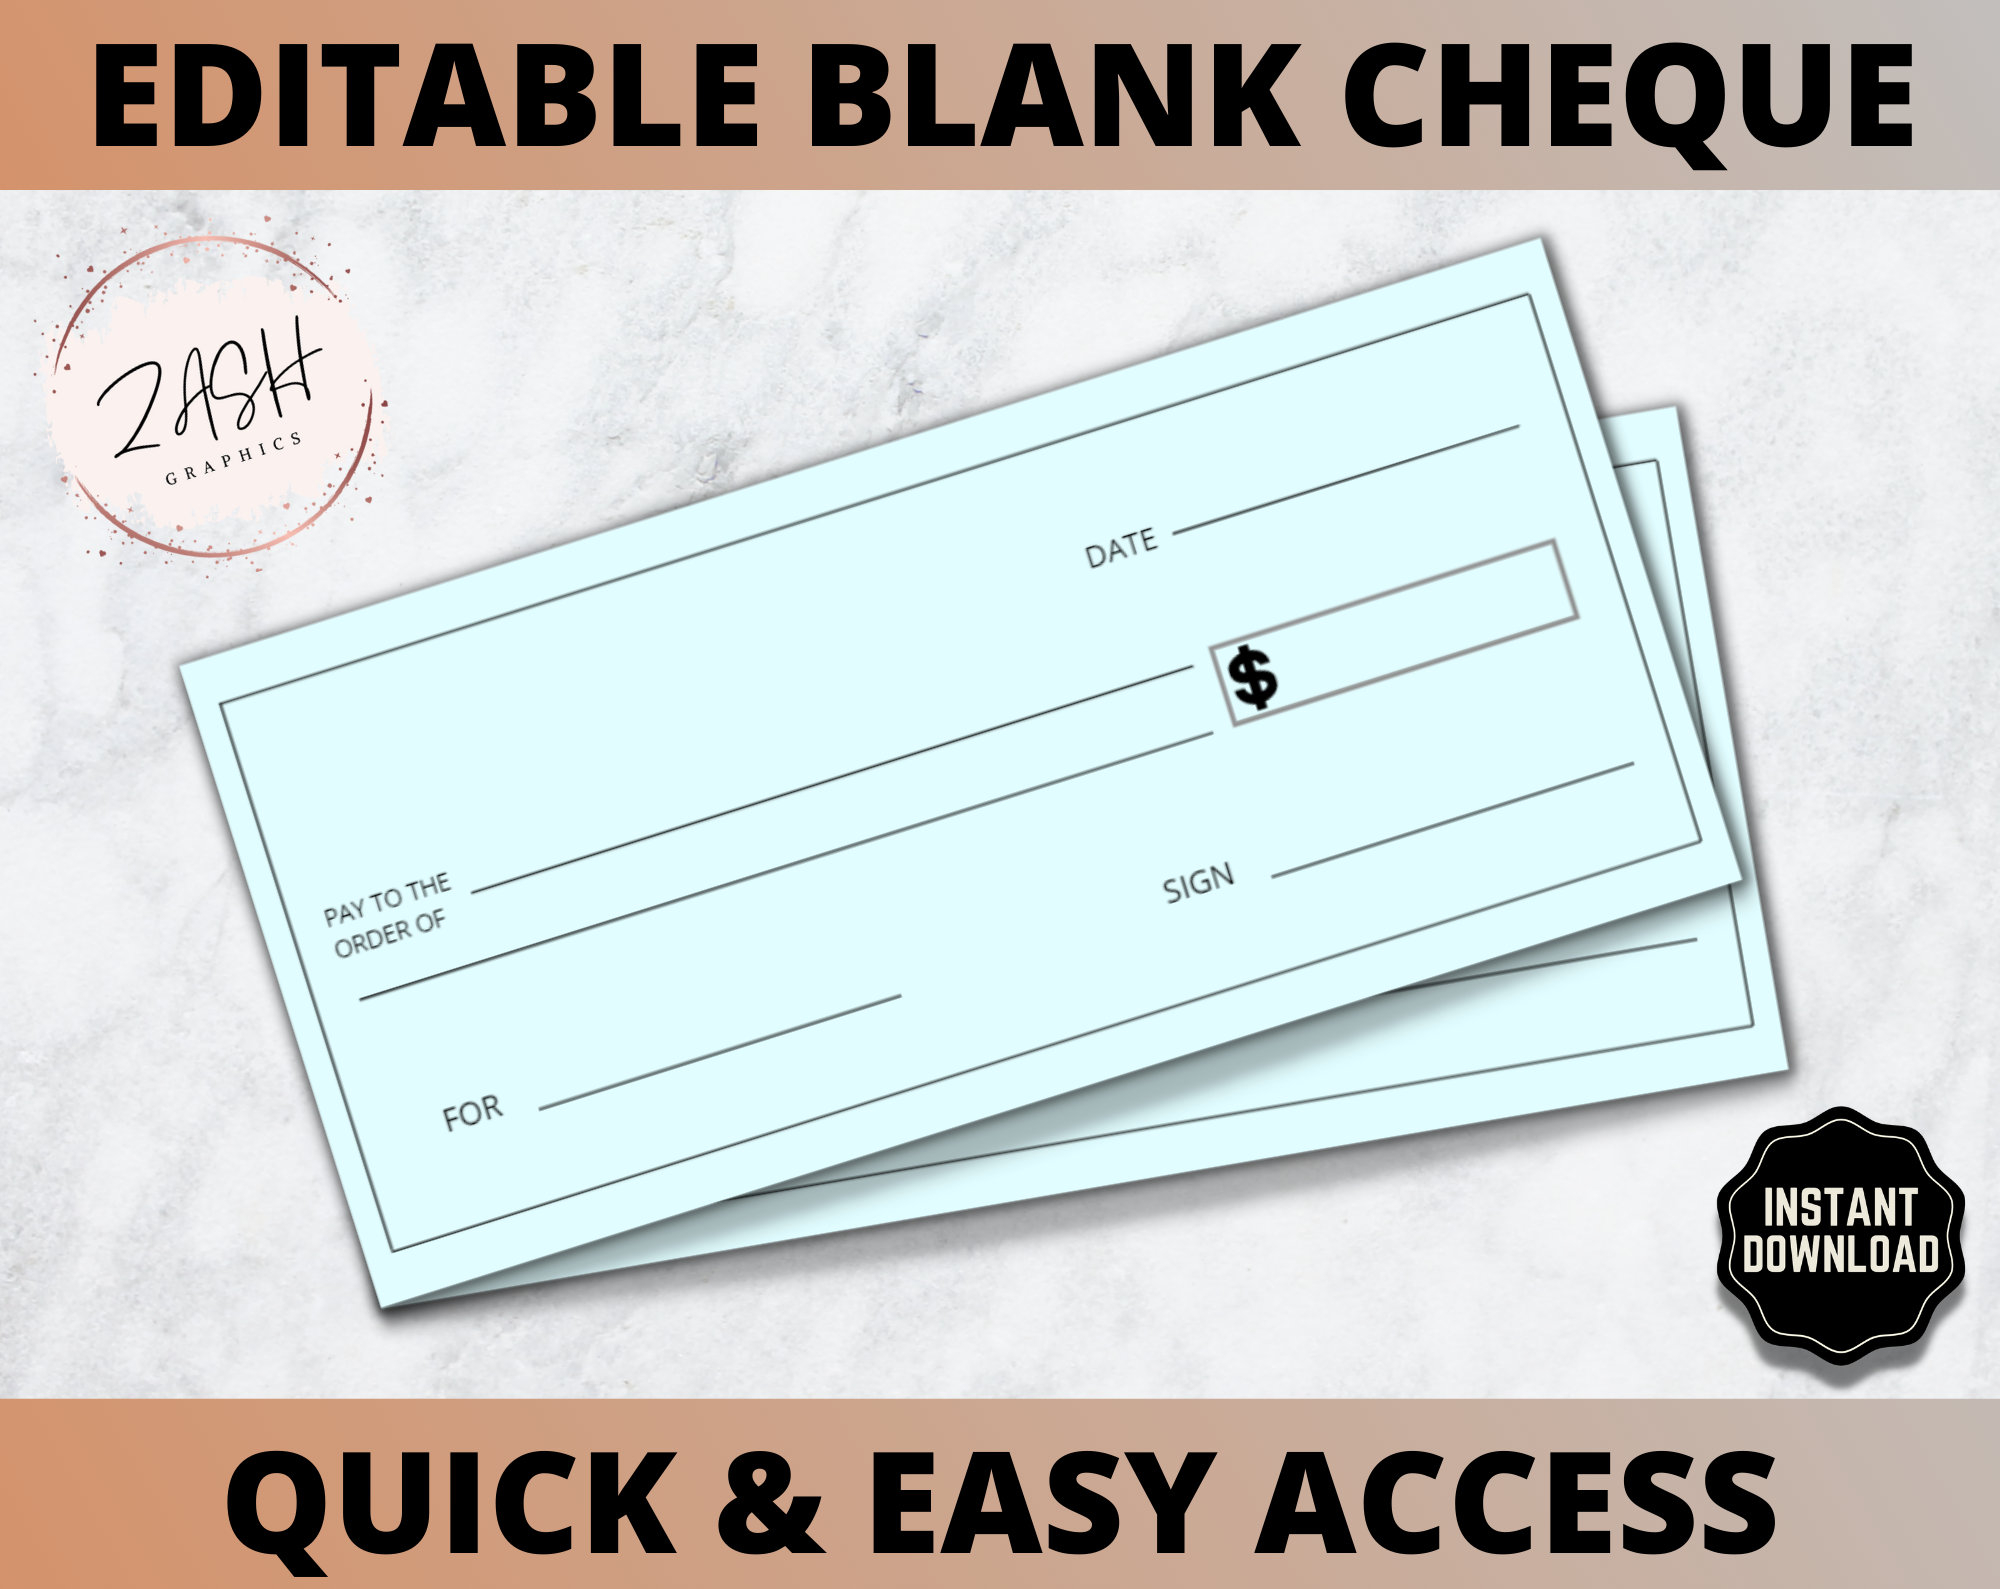 Blank Check Template Editable Bank Cheque Printable Cheque - Etsy UK Inside Blank Cheque Template Uk